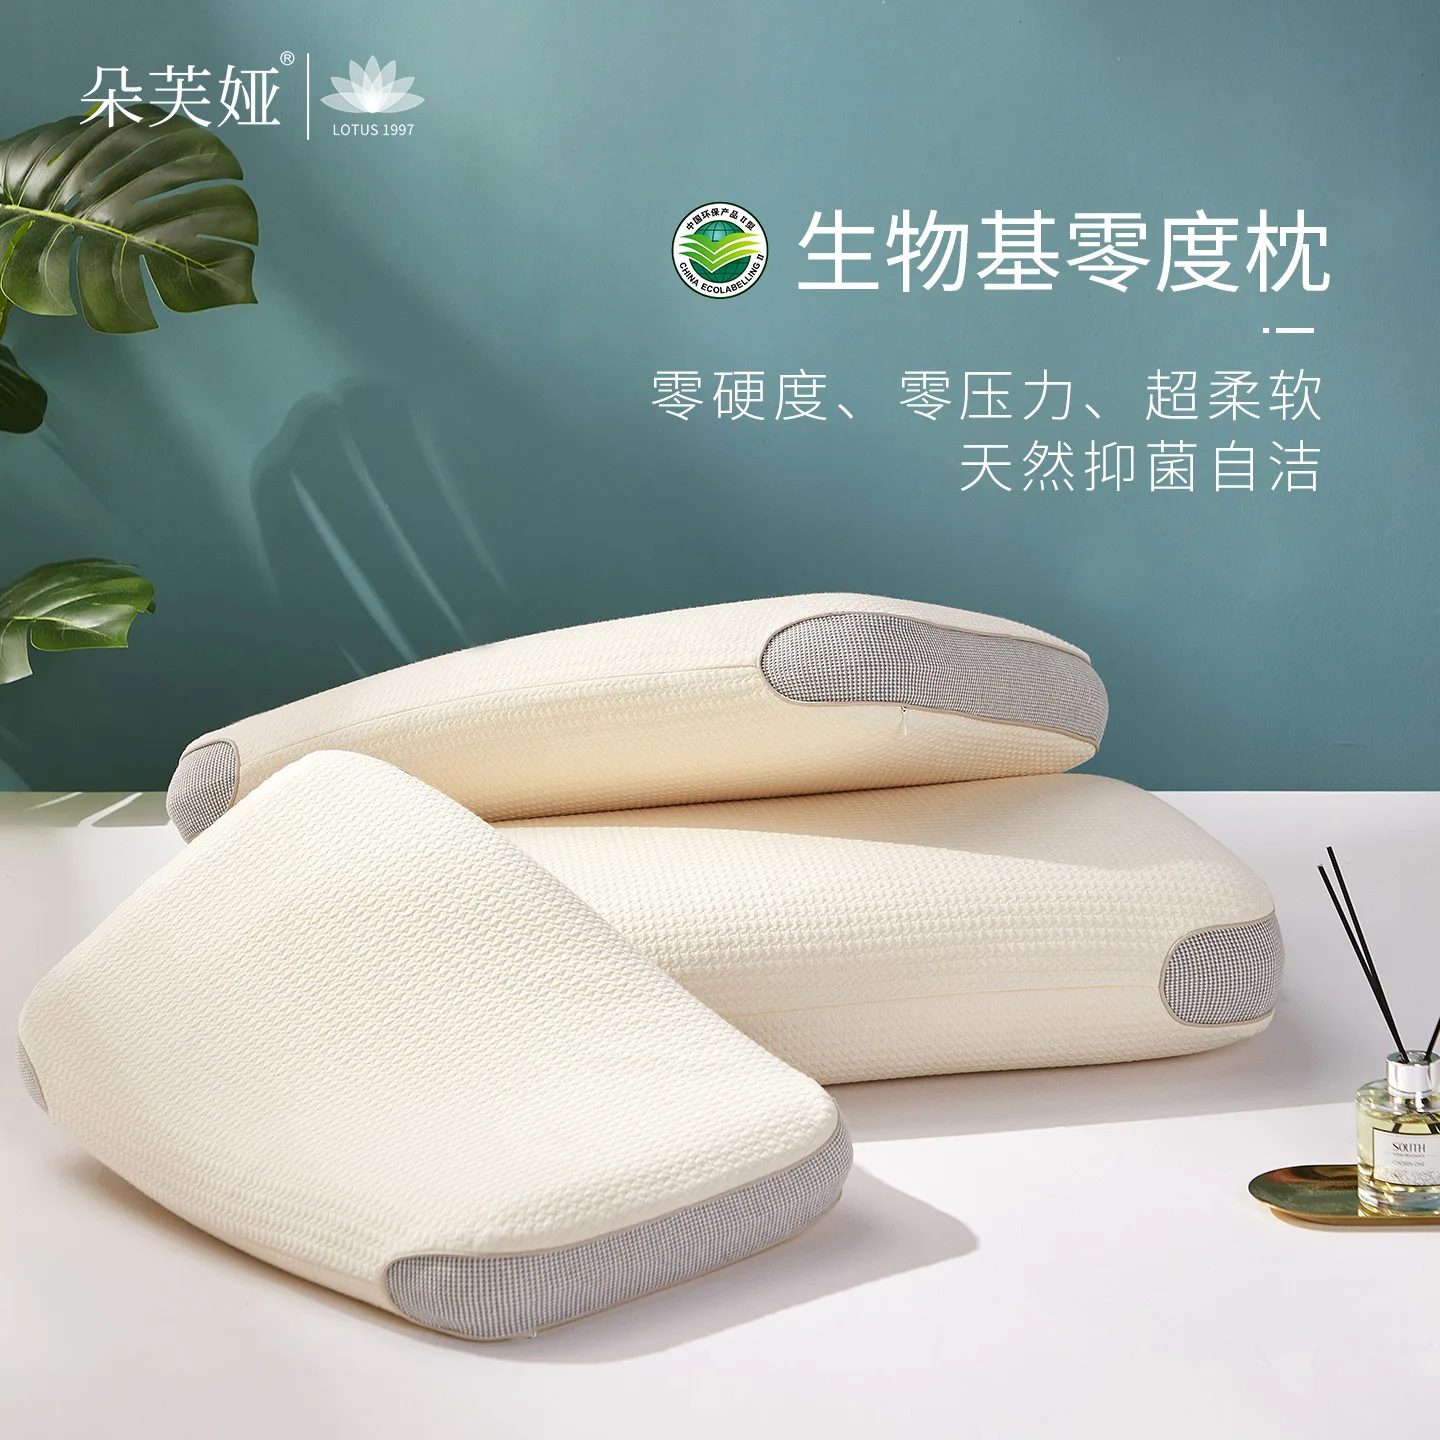 

Bio-based zero memory cotton pillow protects cervical vertebra helps sleep does not collapse bacteriostatic pillow core